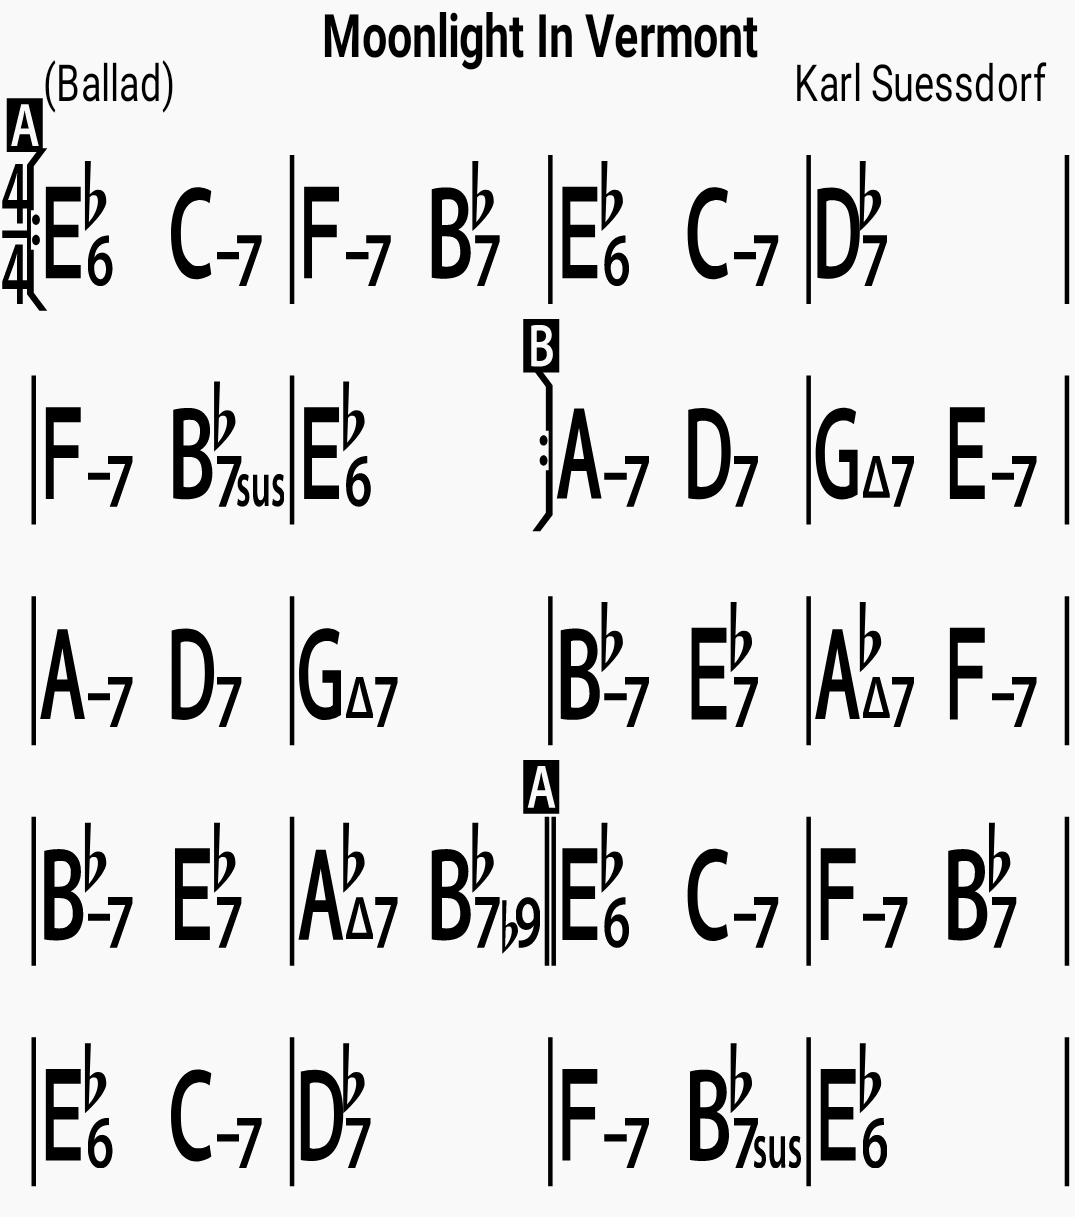 Chord chart for the jazz standard Moonlight In Vermont